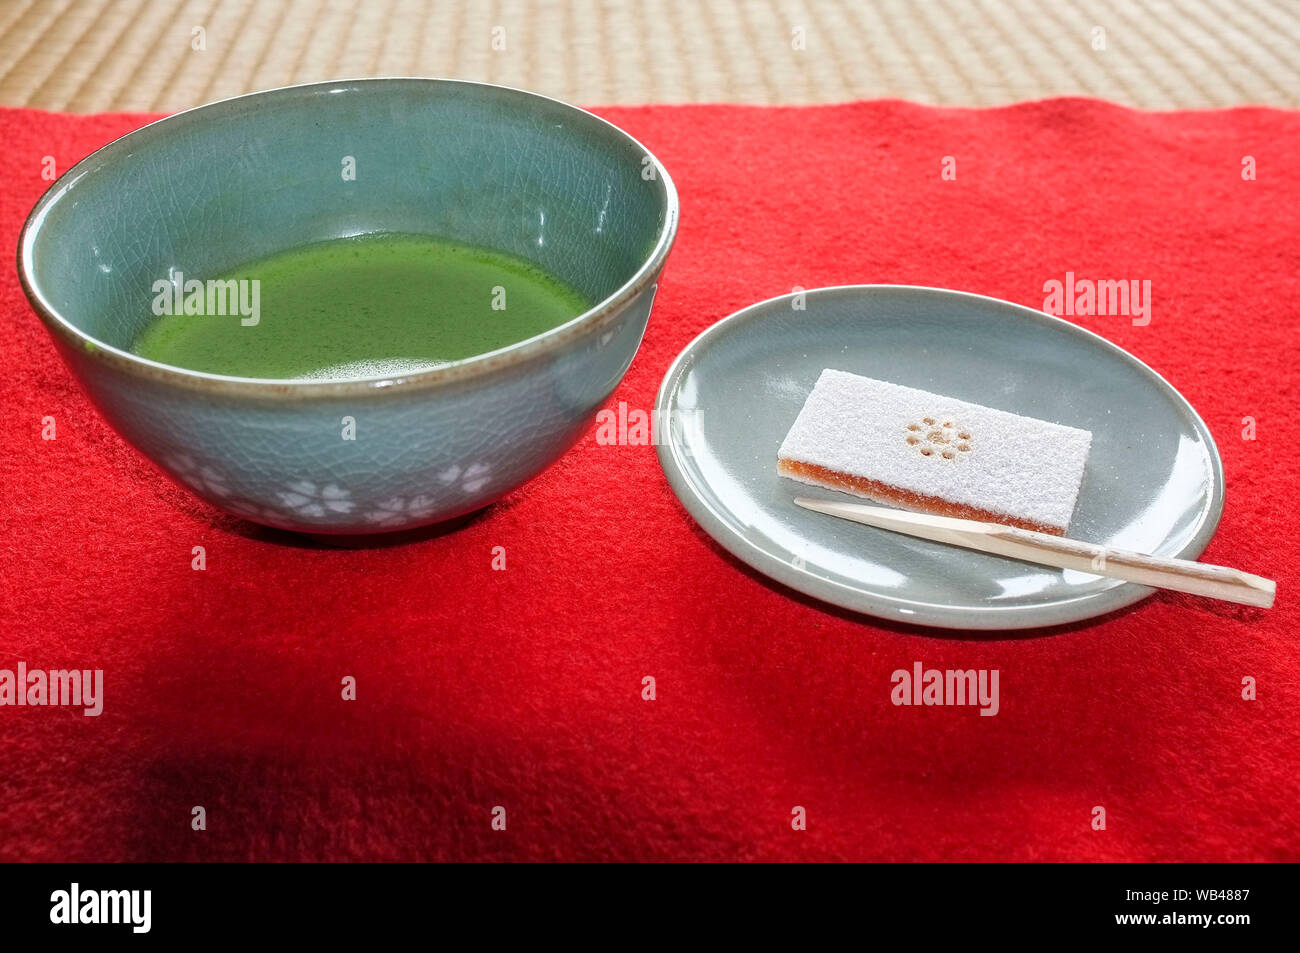 Japanese green tea called Matcha or macha with traditional sweet cake in Japan. Stock Photo